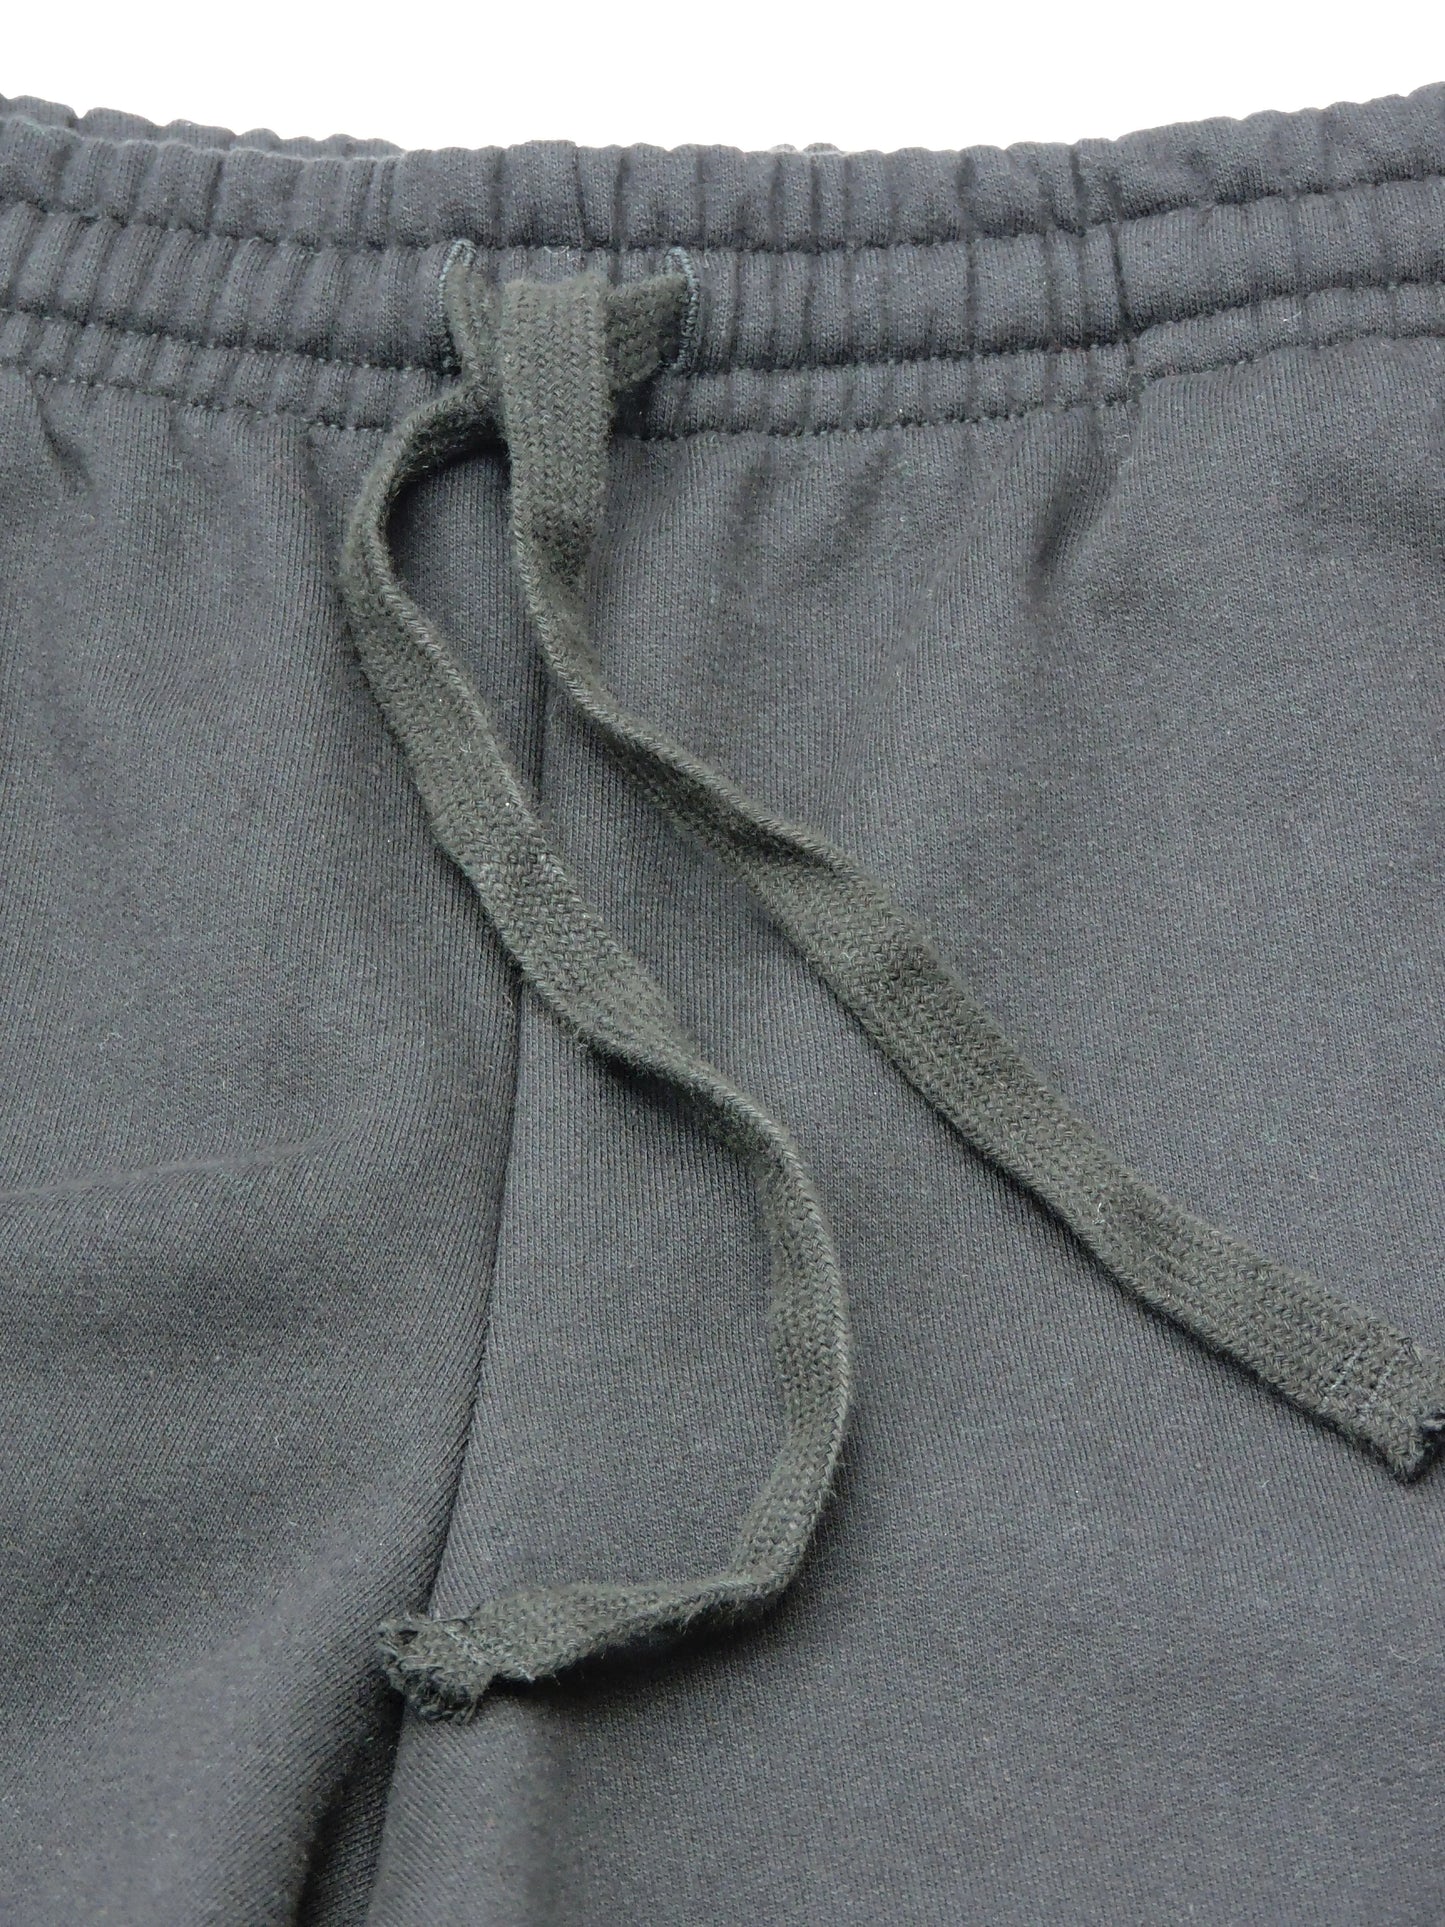 Close up of drawstrings and organic cotton fleece material